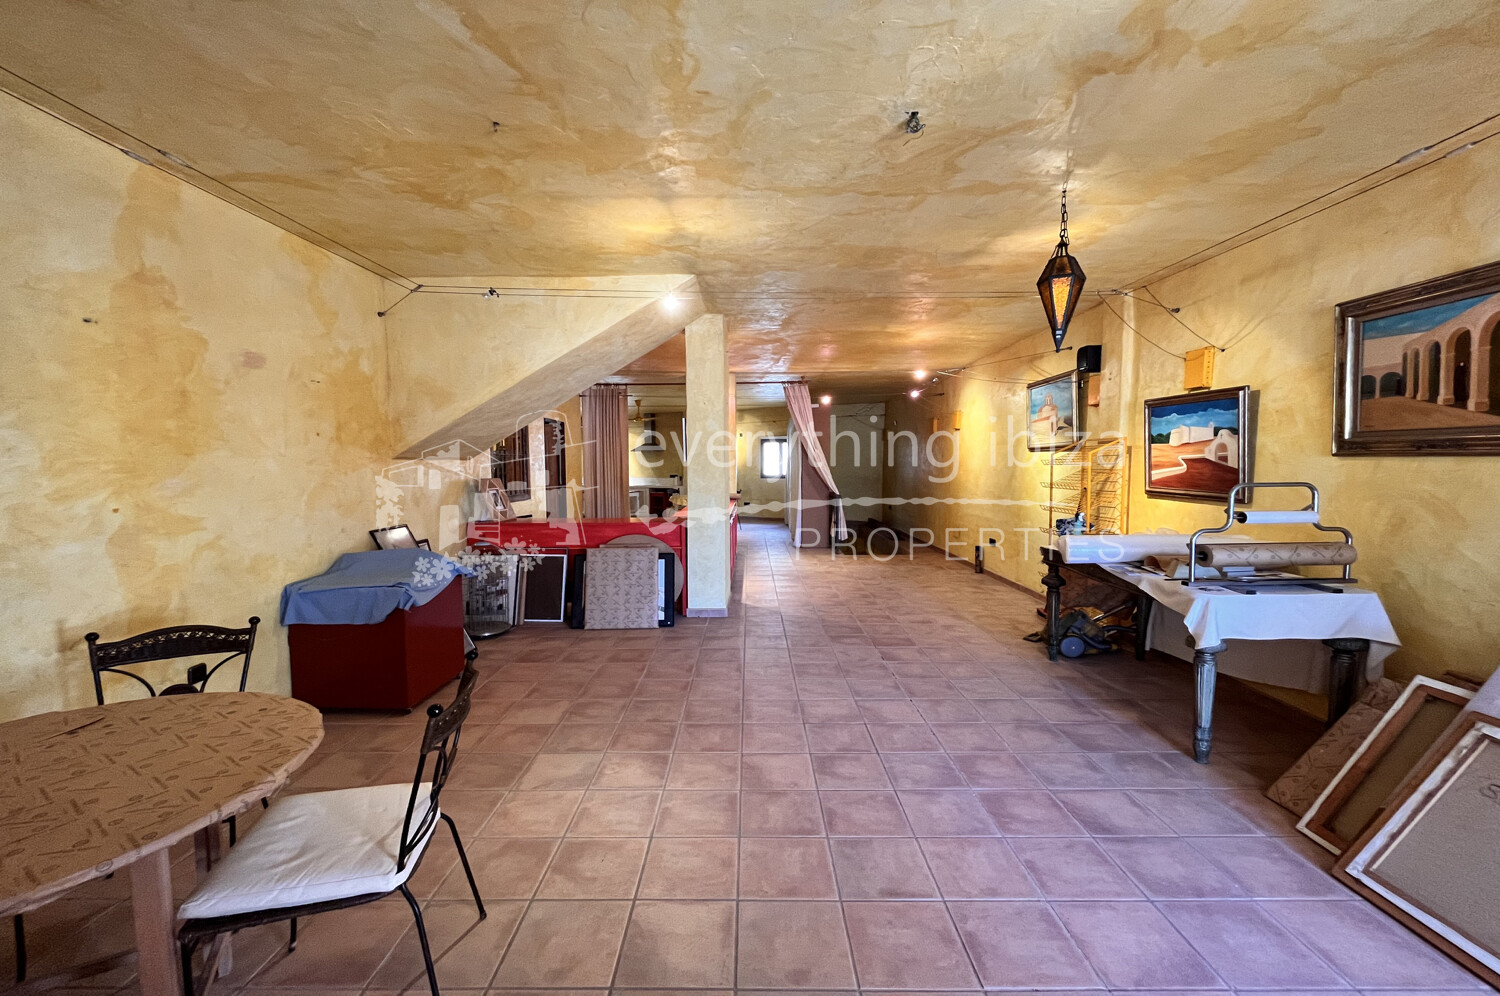 https://www.everythingibiza.com/properties/versatile-commer…of-san-jose-1640/,ref. 1, for sale in Ibiza by everything ibiza Properties